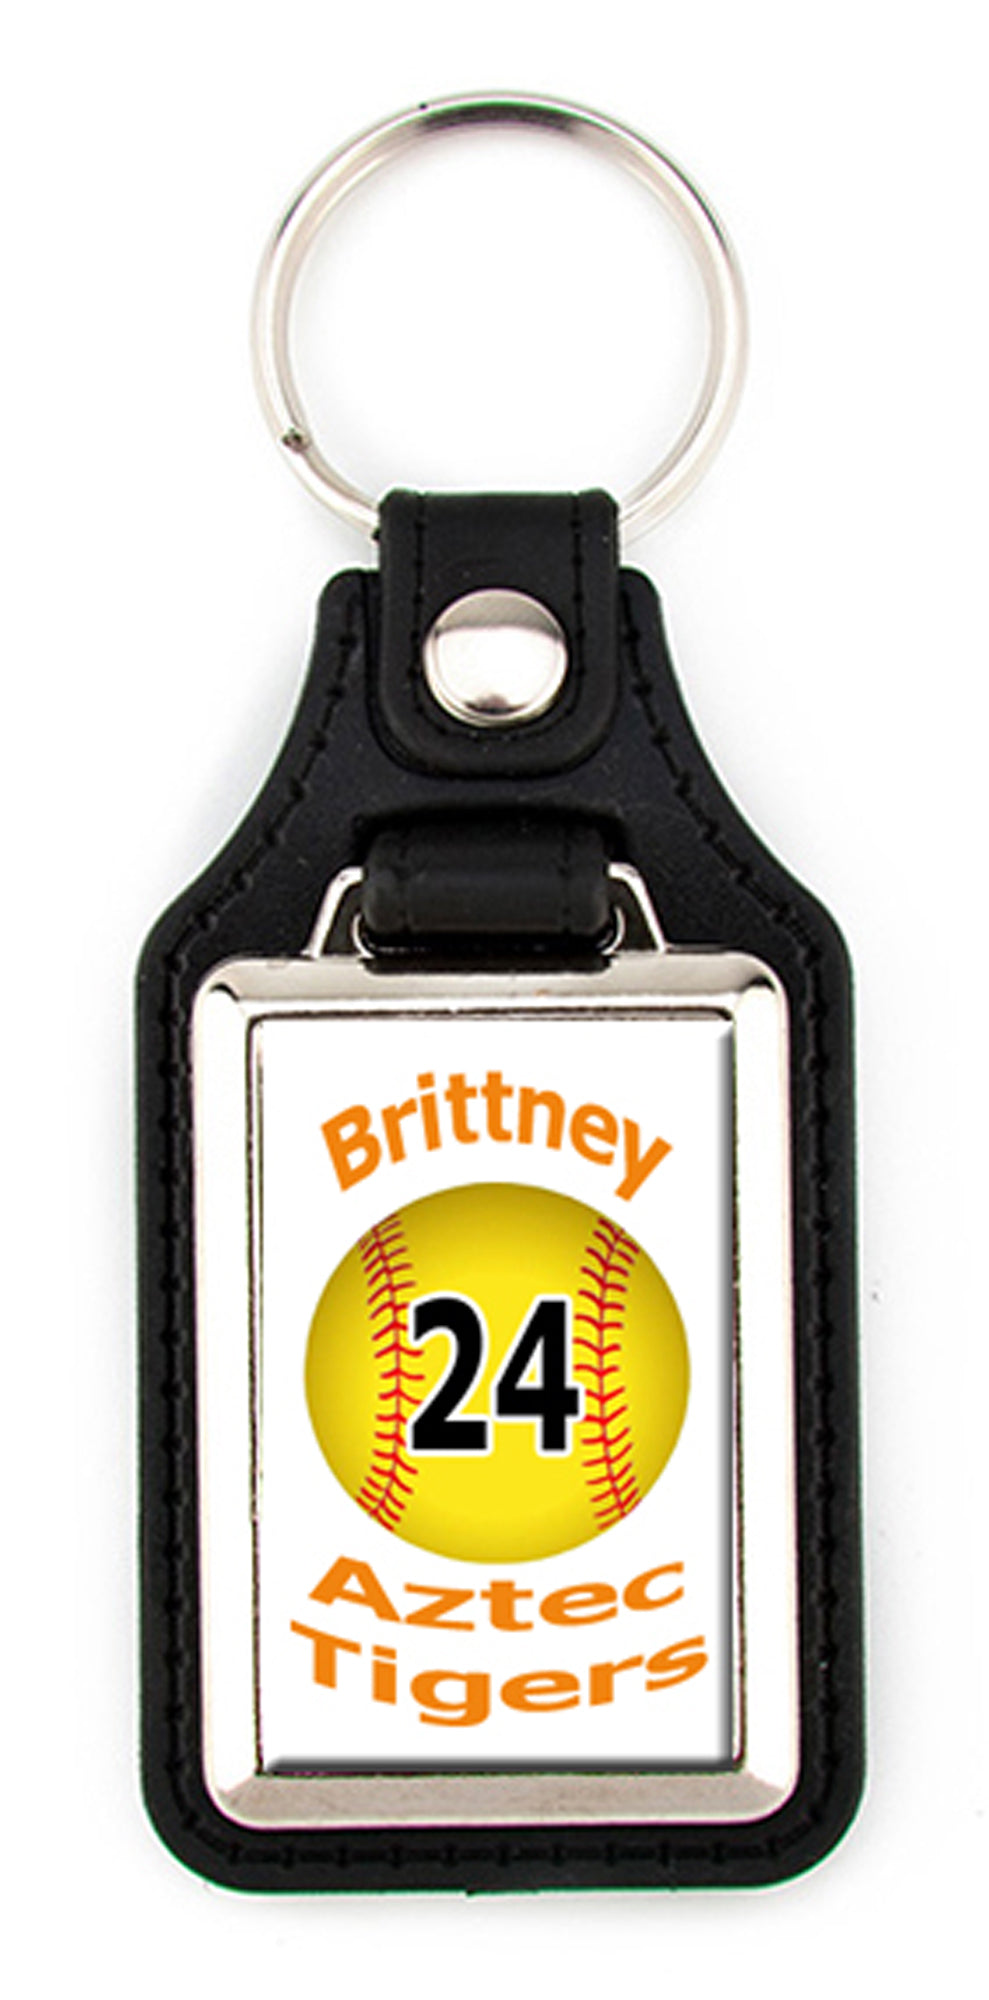 Personalized Baseball Faux Leather Key Ring vwith Name, Team name, and Number